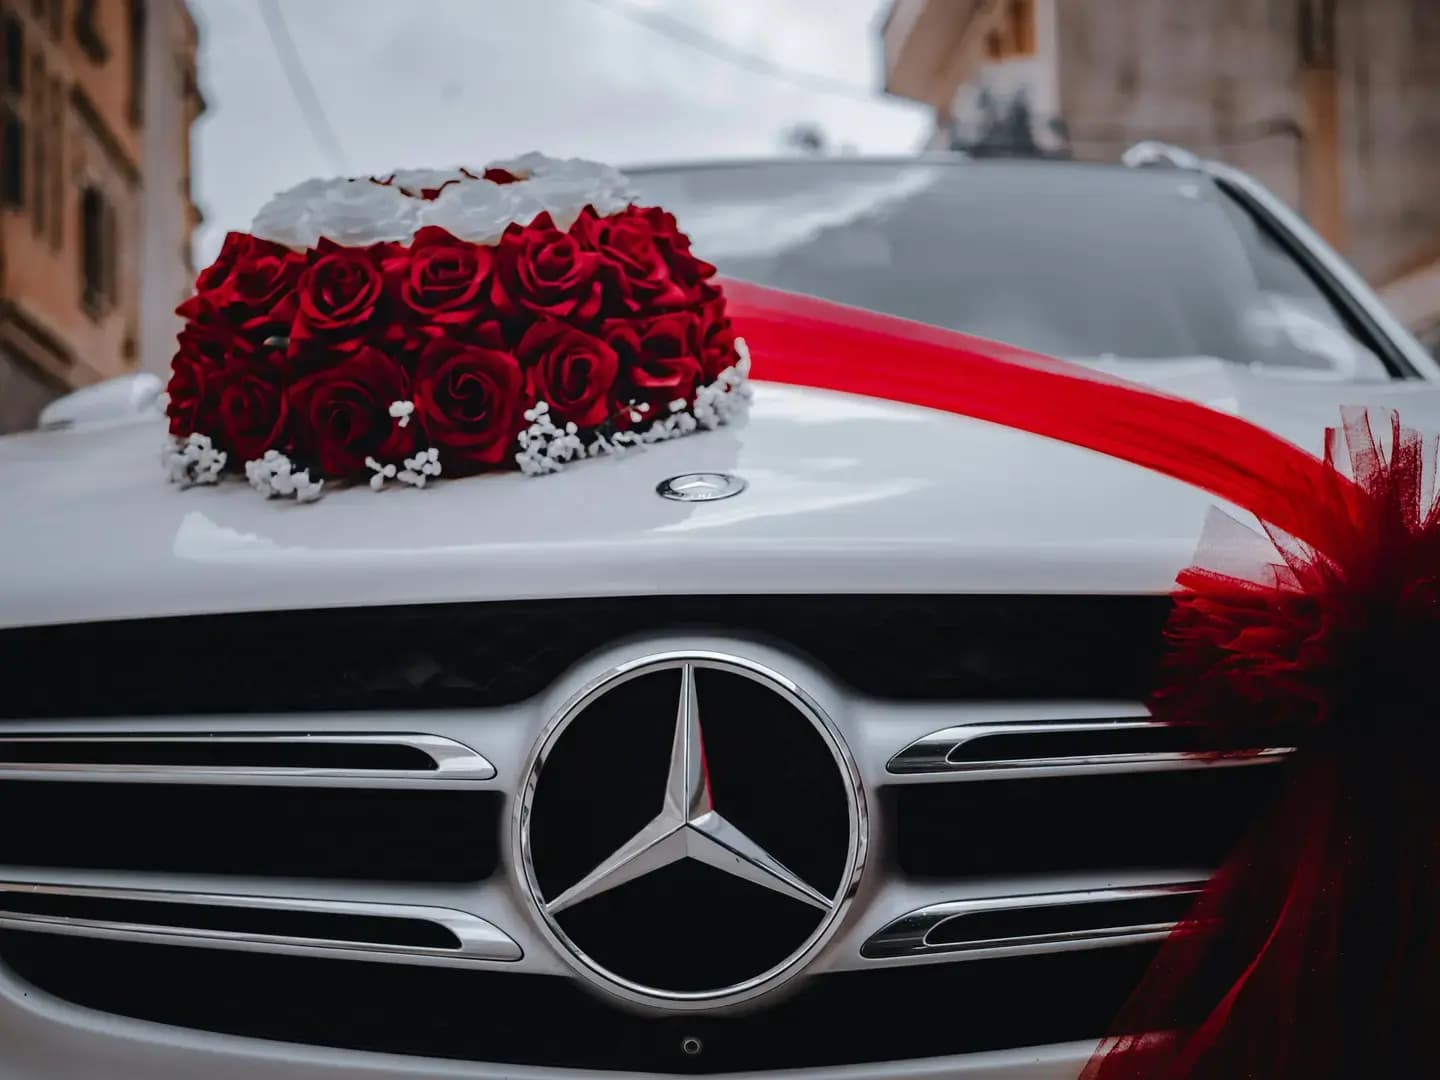 Experience Elegance on Your Special Day with MNMRidez's Mercedes Wedding Car Service